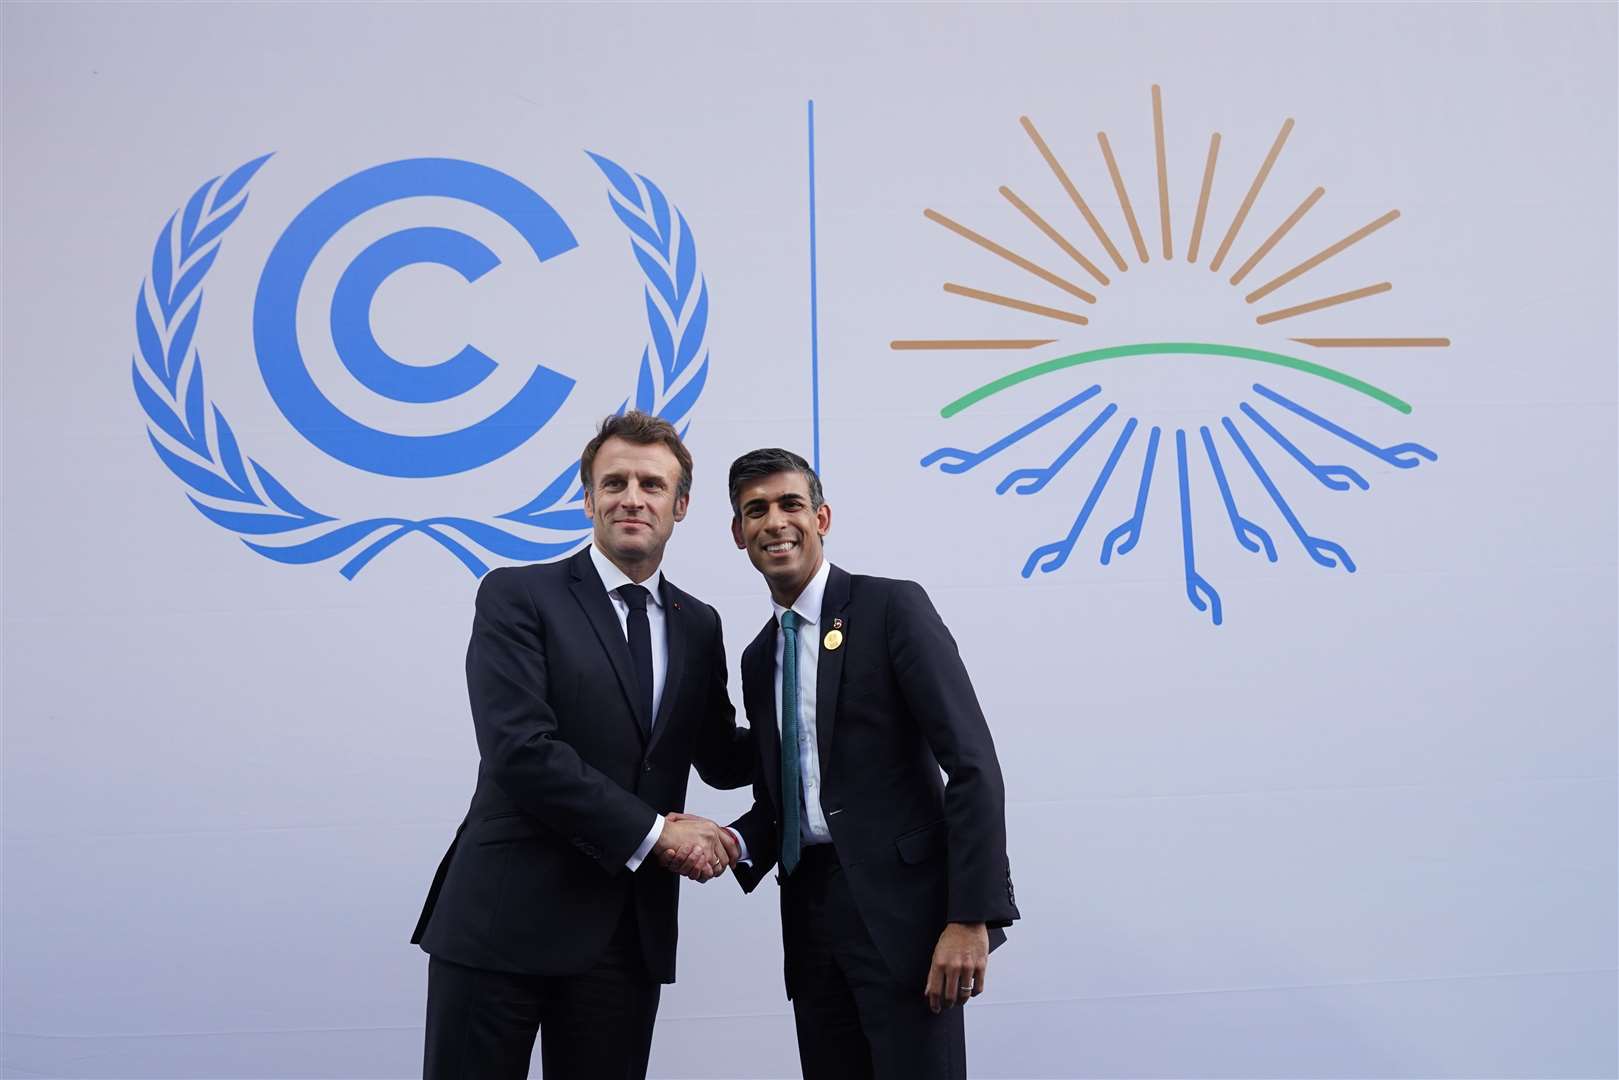 Emmanuel Macron and Rishi Sunak ahead of their bilateral meeting during the Cop27 summit (Stefan Rousseau/PA)